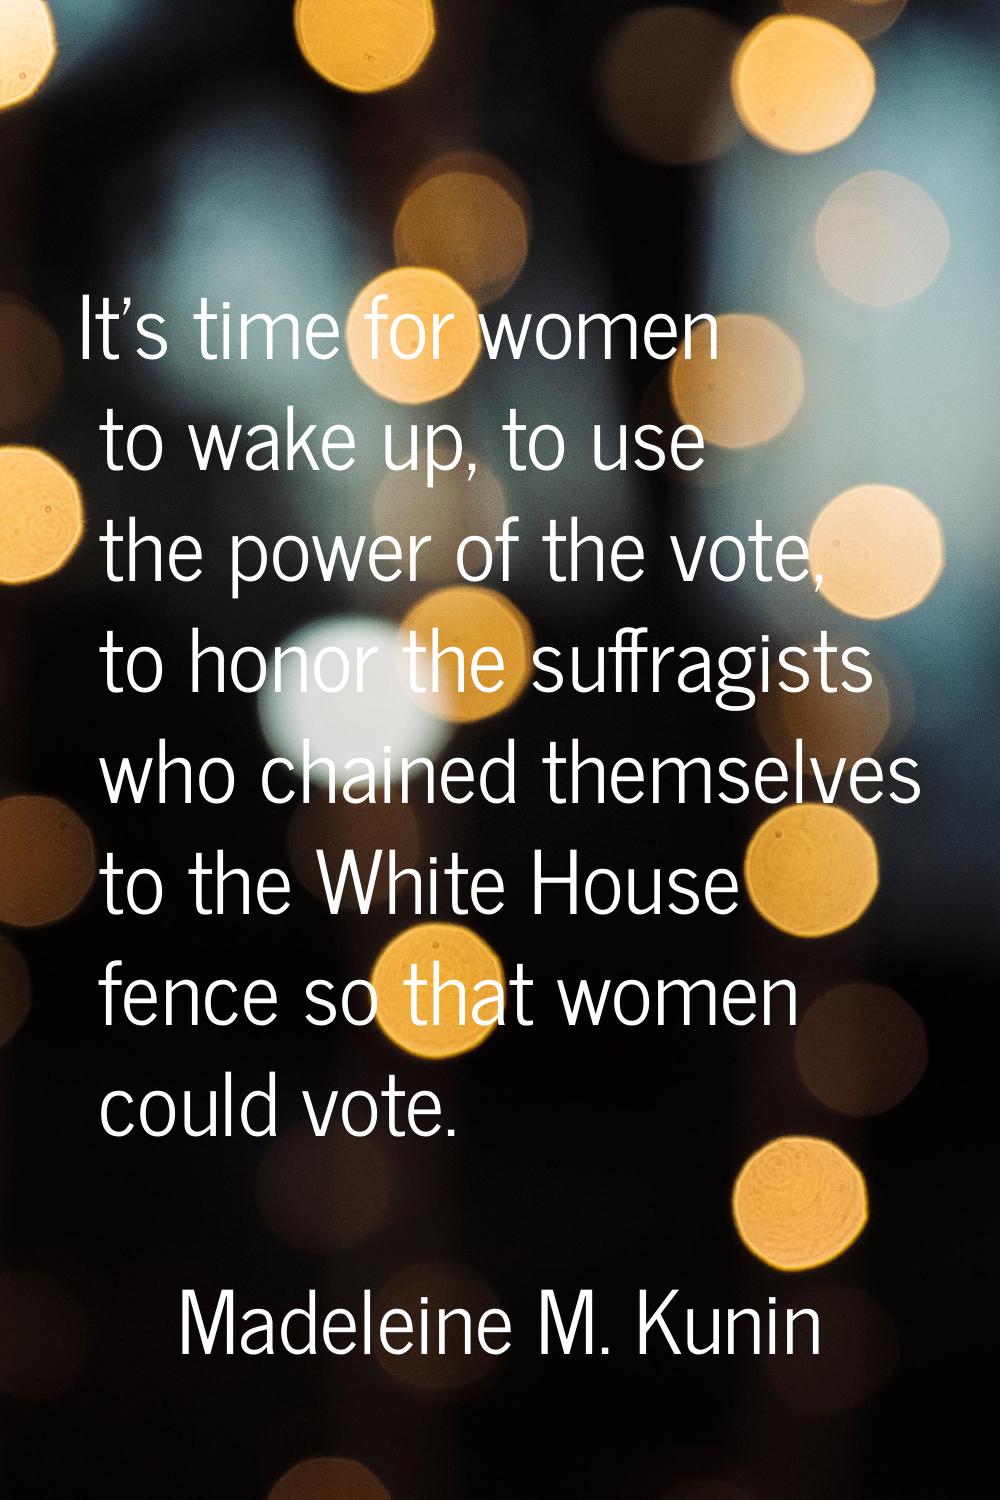 It's time for women to wake up, to use the power of the vote, to honor the suffragists who chained 